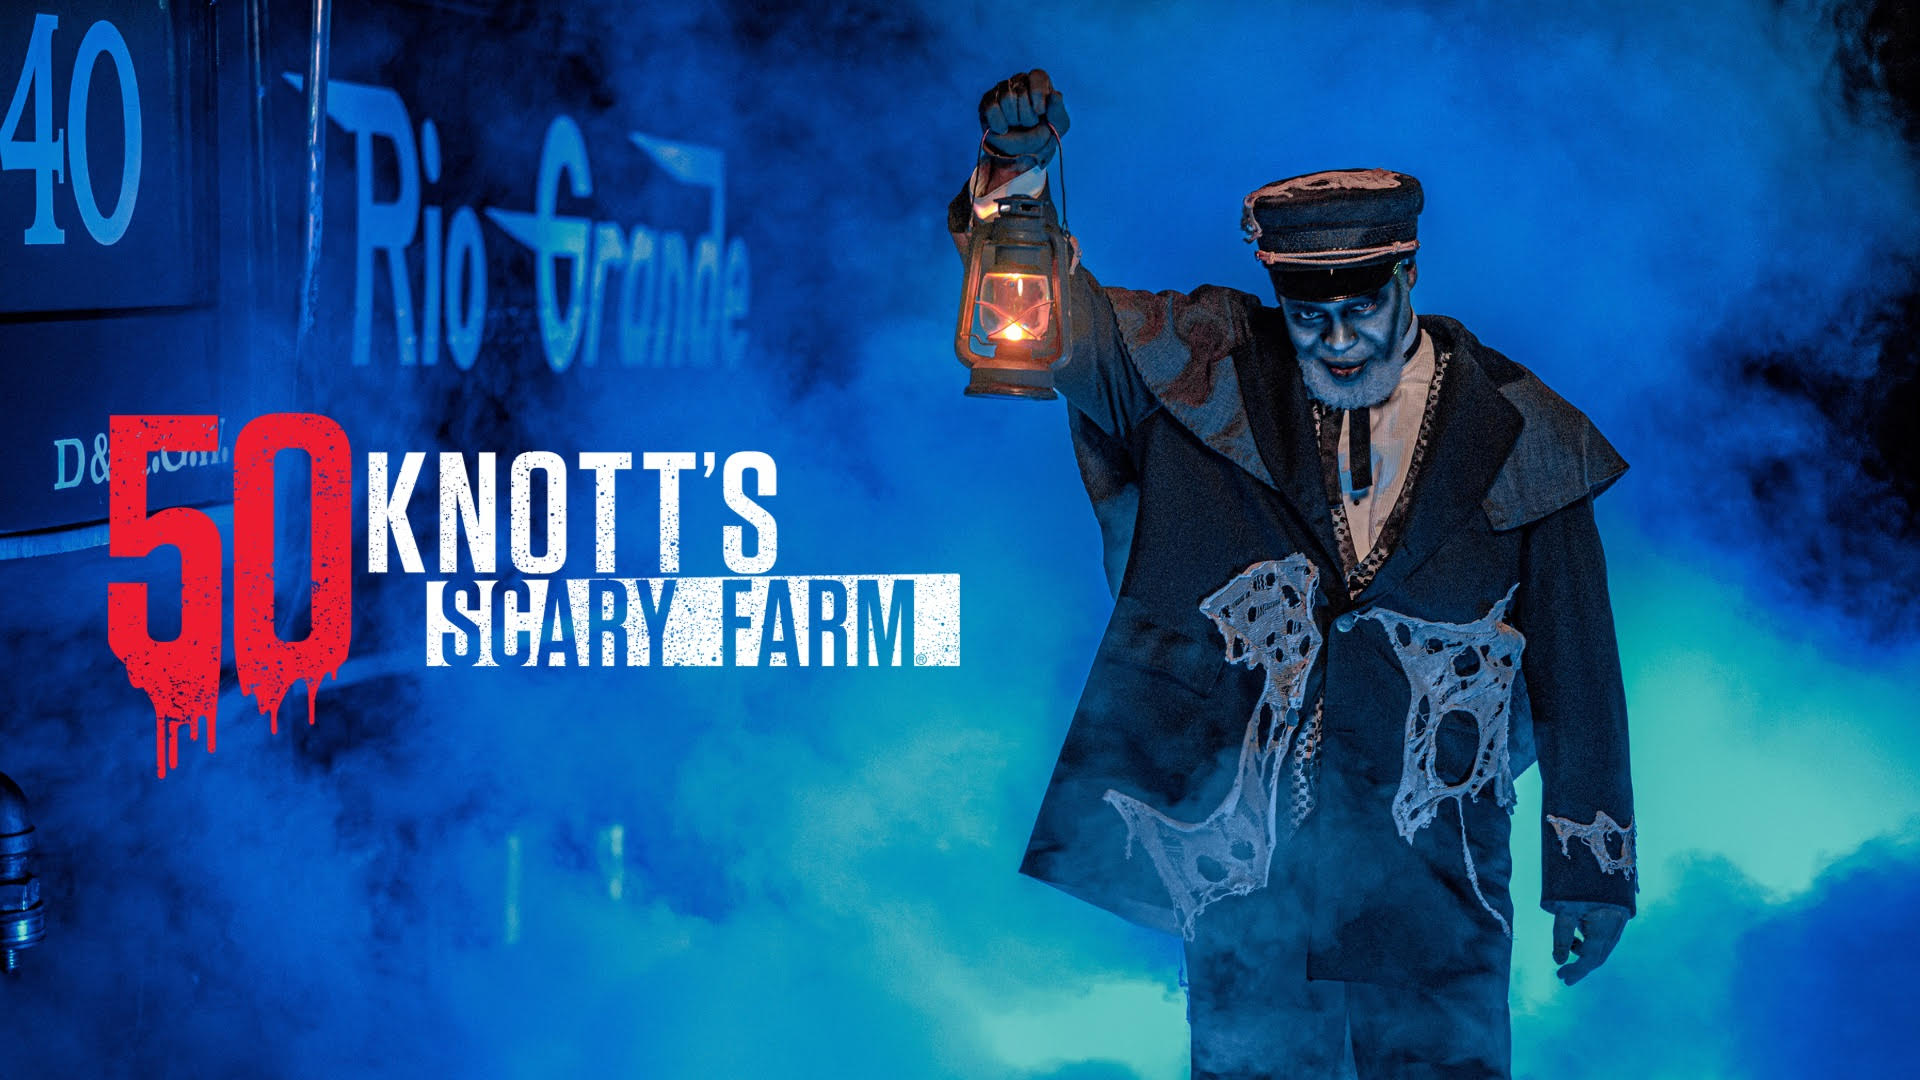 Celebrities Set to Walk the Black Carpet At Knott’s Scary Farm in Celebration of 50th Anniversary